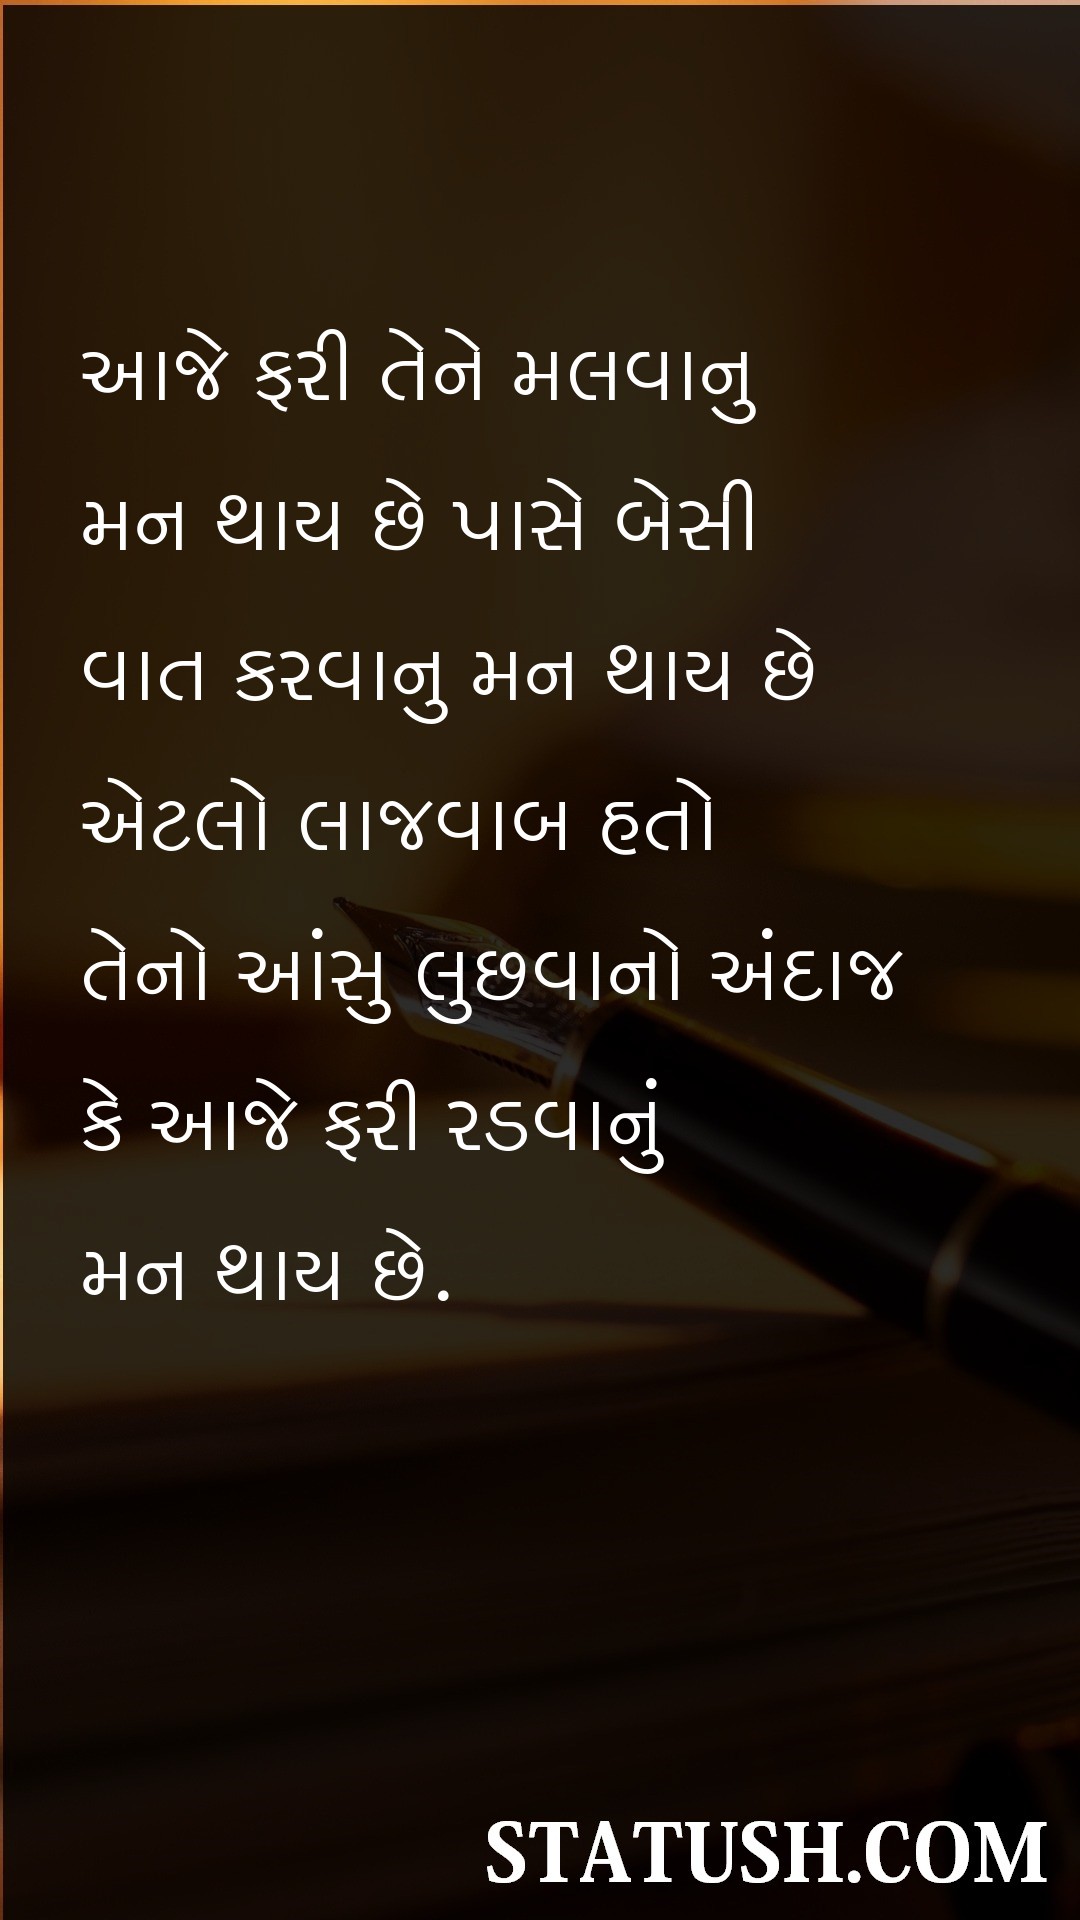 Today I would like to meet her again - Gujarati Quotes at statush.com